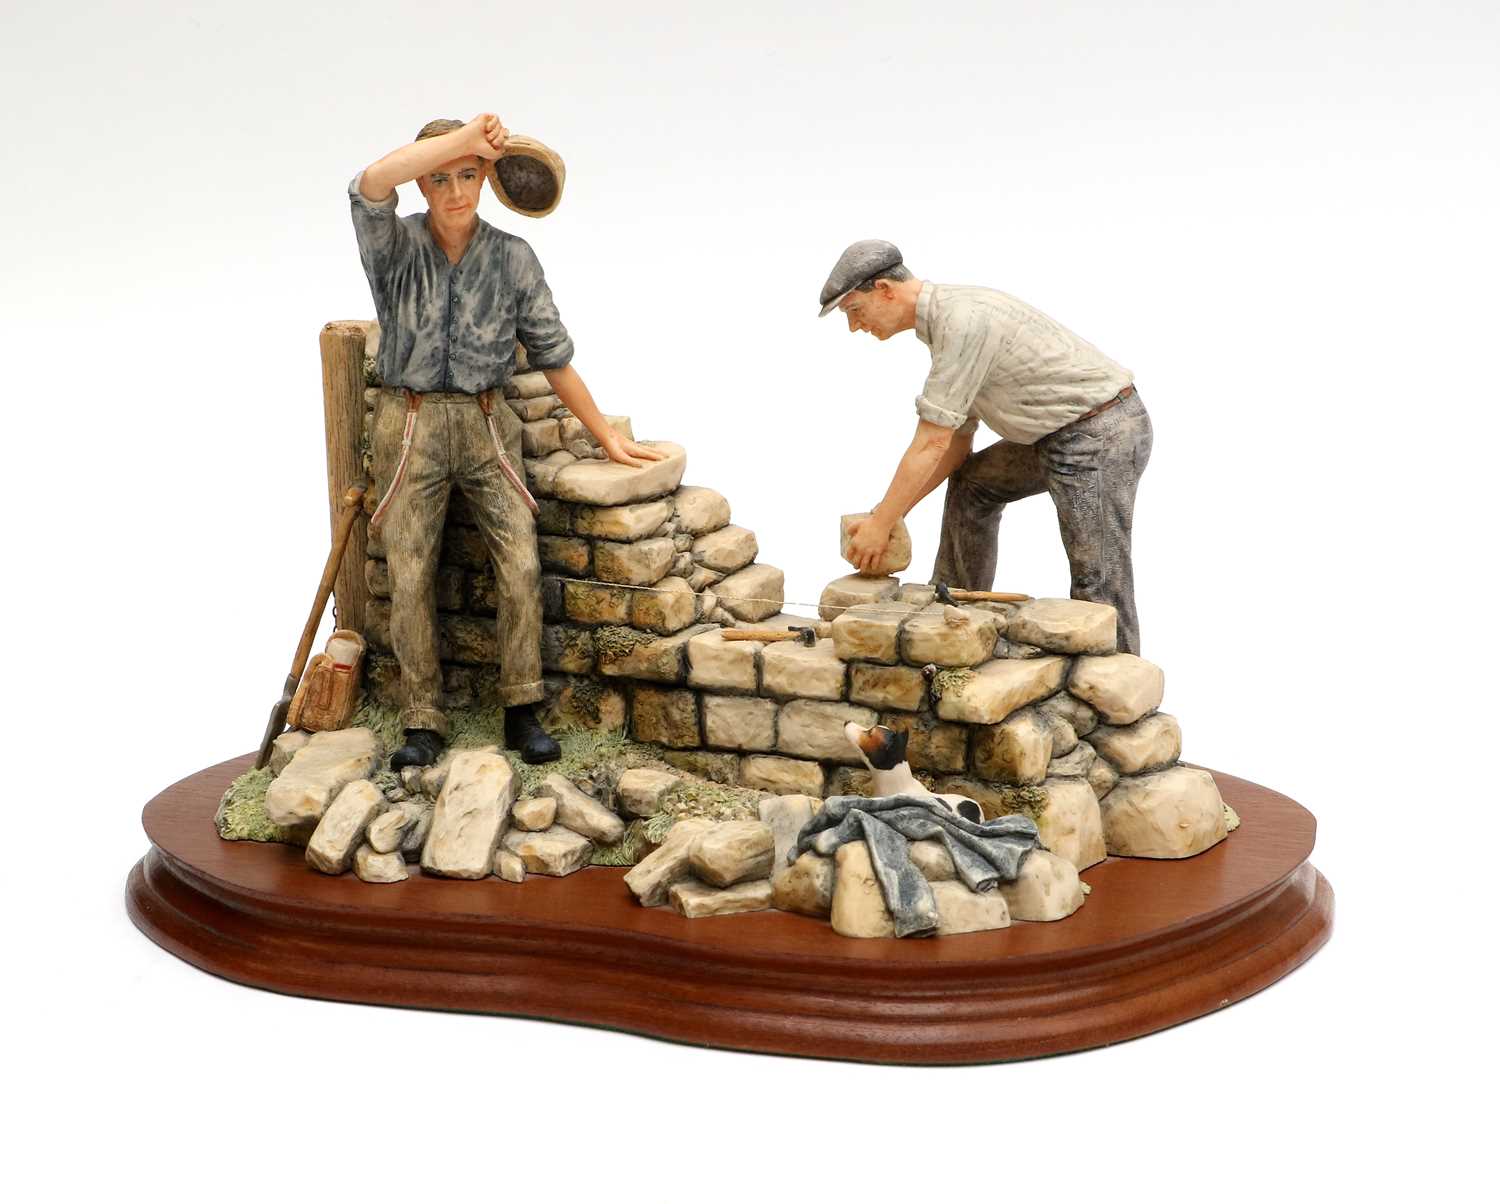 Border Fine Arts 'A Warm Day Walling' (Dry Stone Dyking), model No. JH31 by Ray Ayres, limited - Image 4 of 4